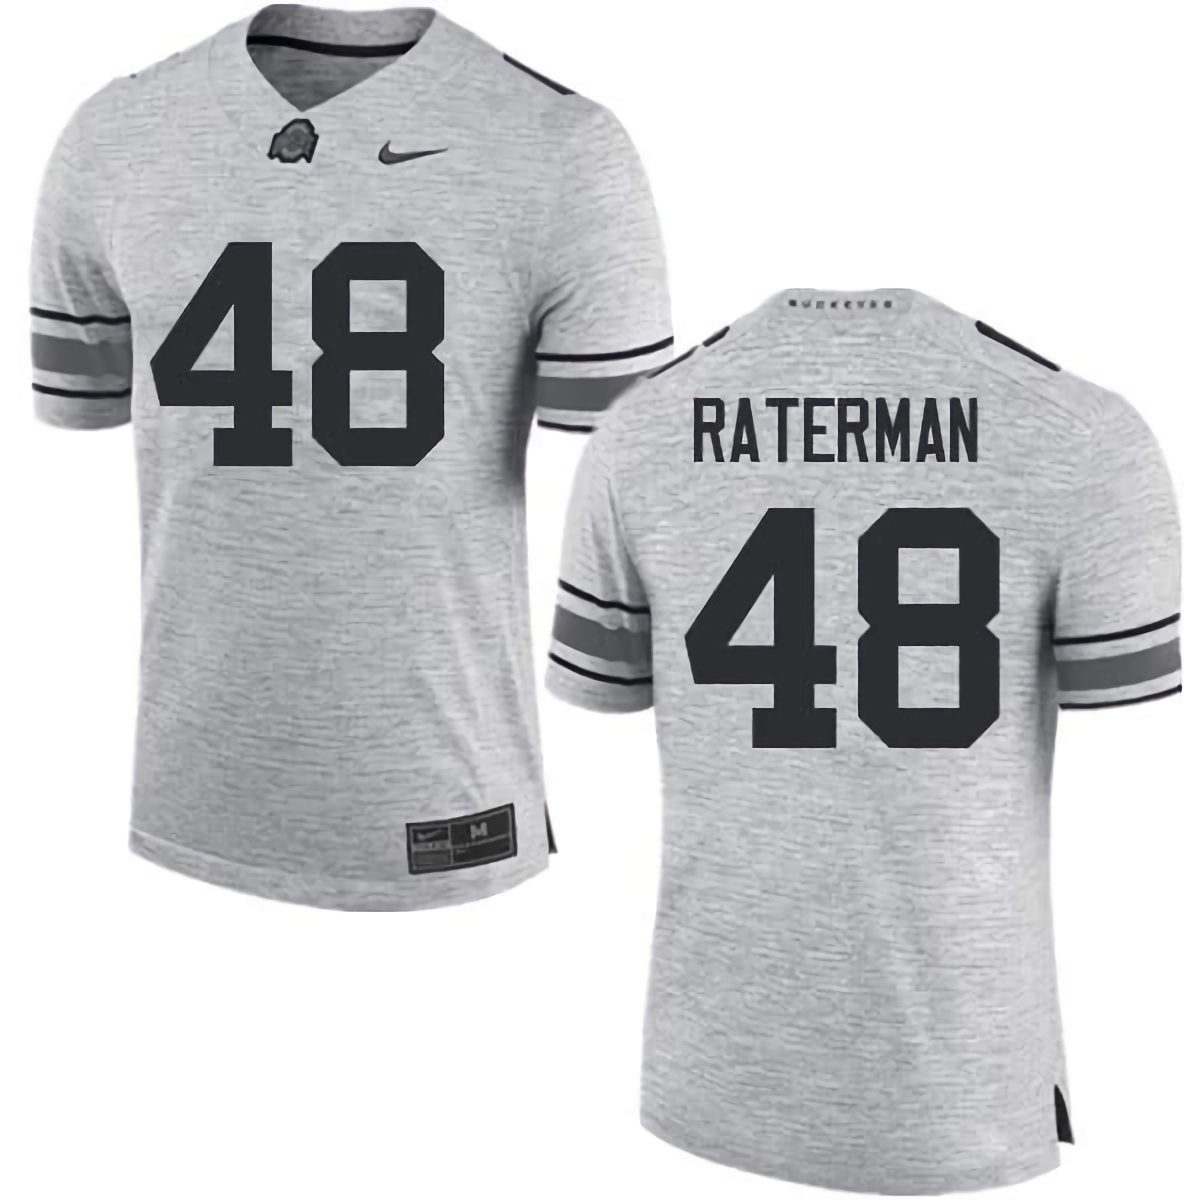 Clay Raterman Ohio State Buckeyes Men's NCAA #48 Nike Gray College Stitched Football Jersey QZA4356JZ